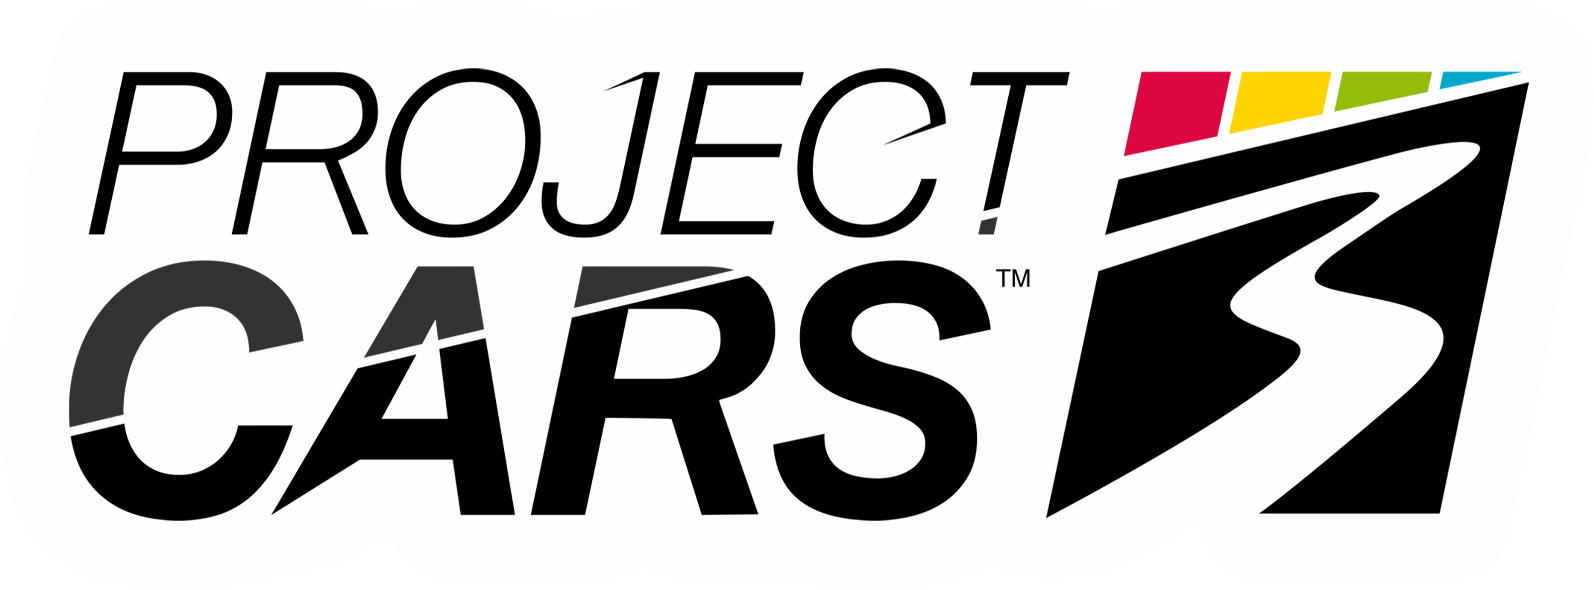 Playstation PS4 Project Cars 3 Multicolor